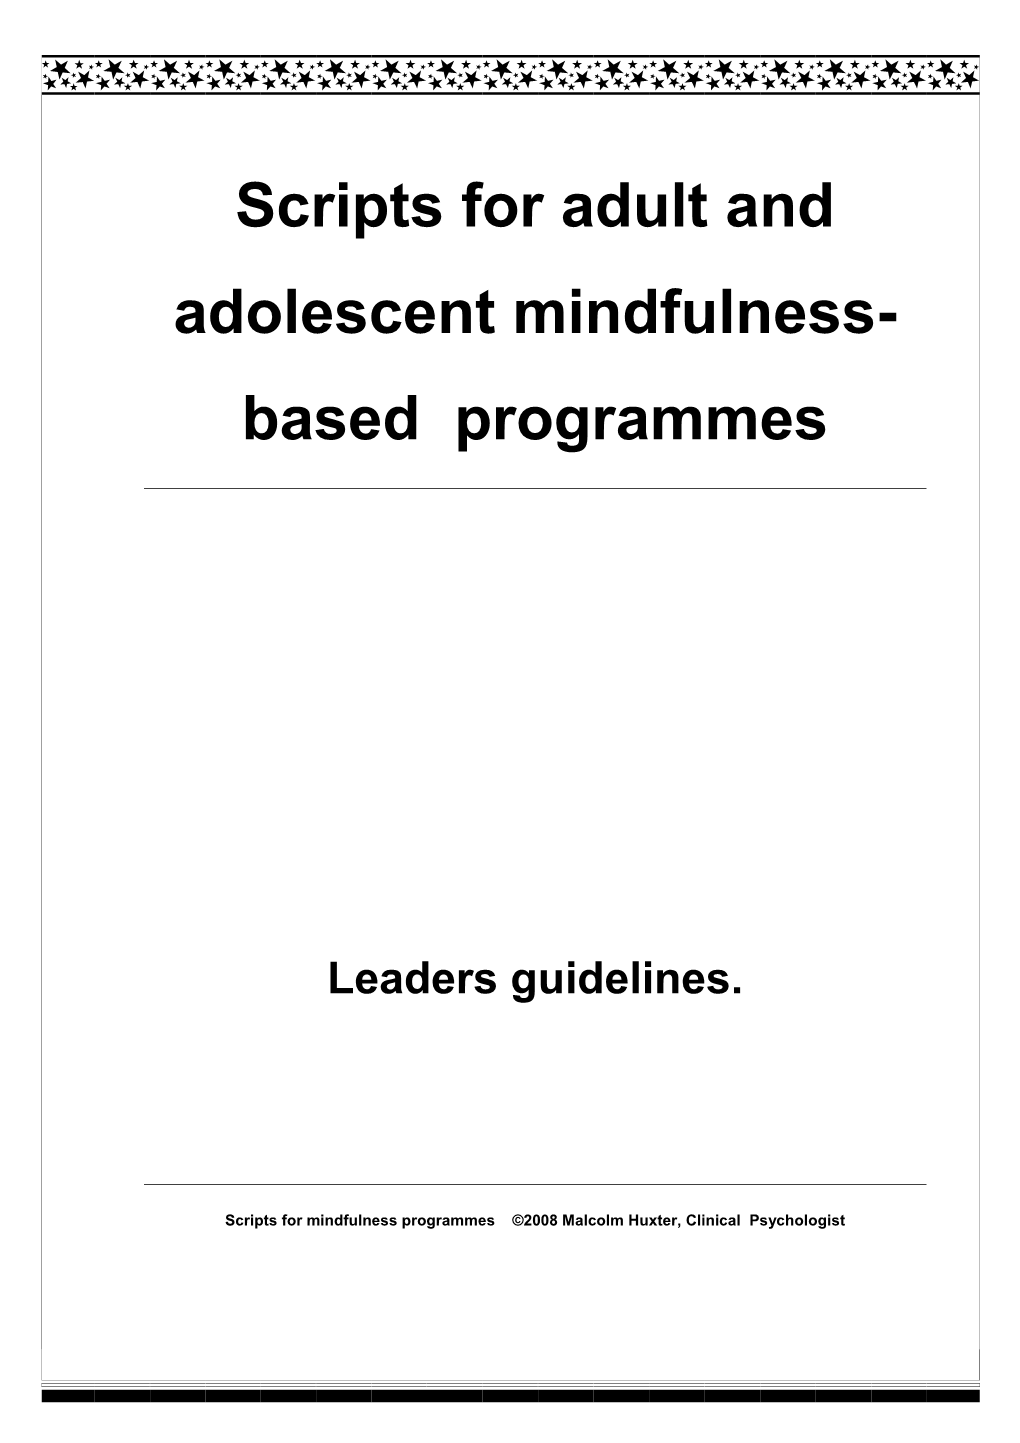 Scripts for Adult and Adolescent Mindfulness- Based Programmes